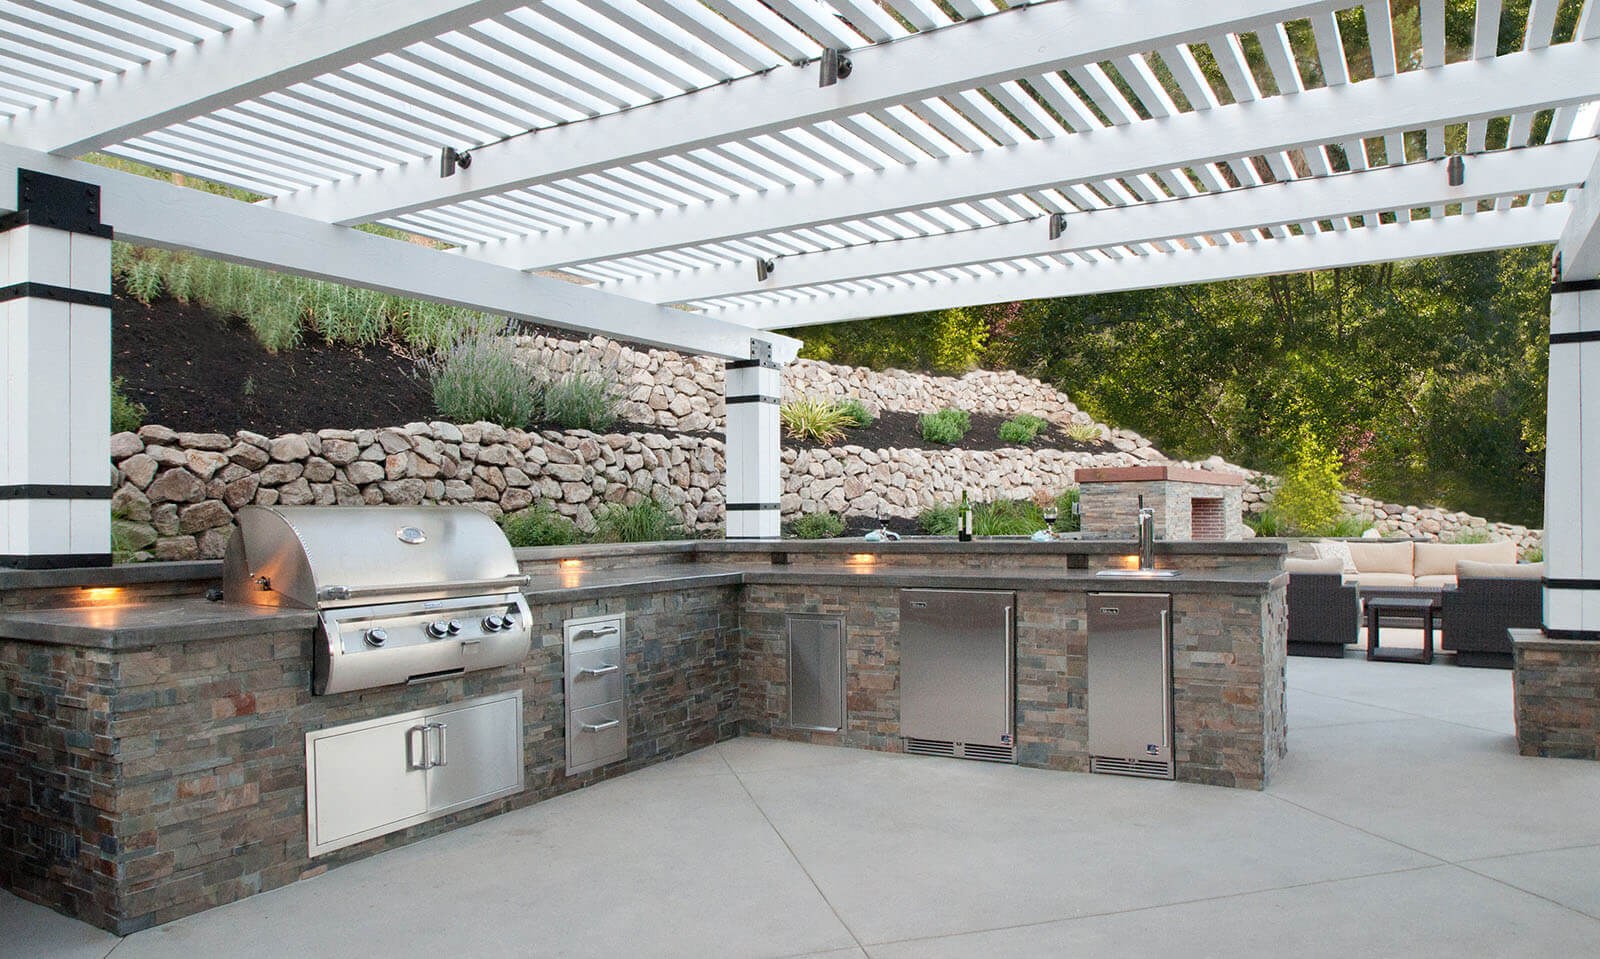 White pergola slat roofed patio with large stone counter-tops and kitchen area with storage, custom grill, and temperature controlled storage areas